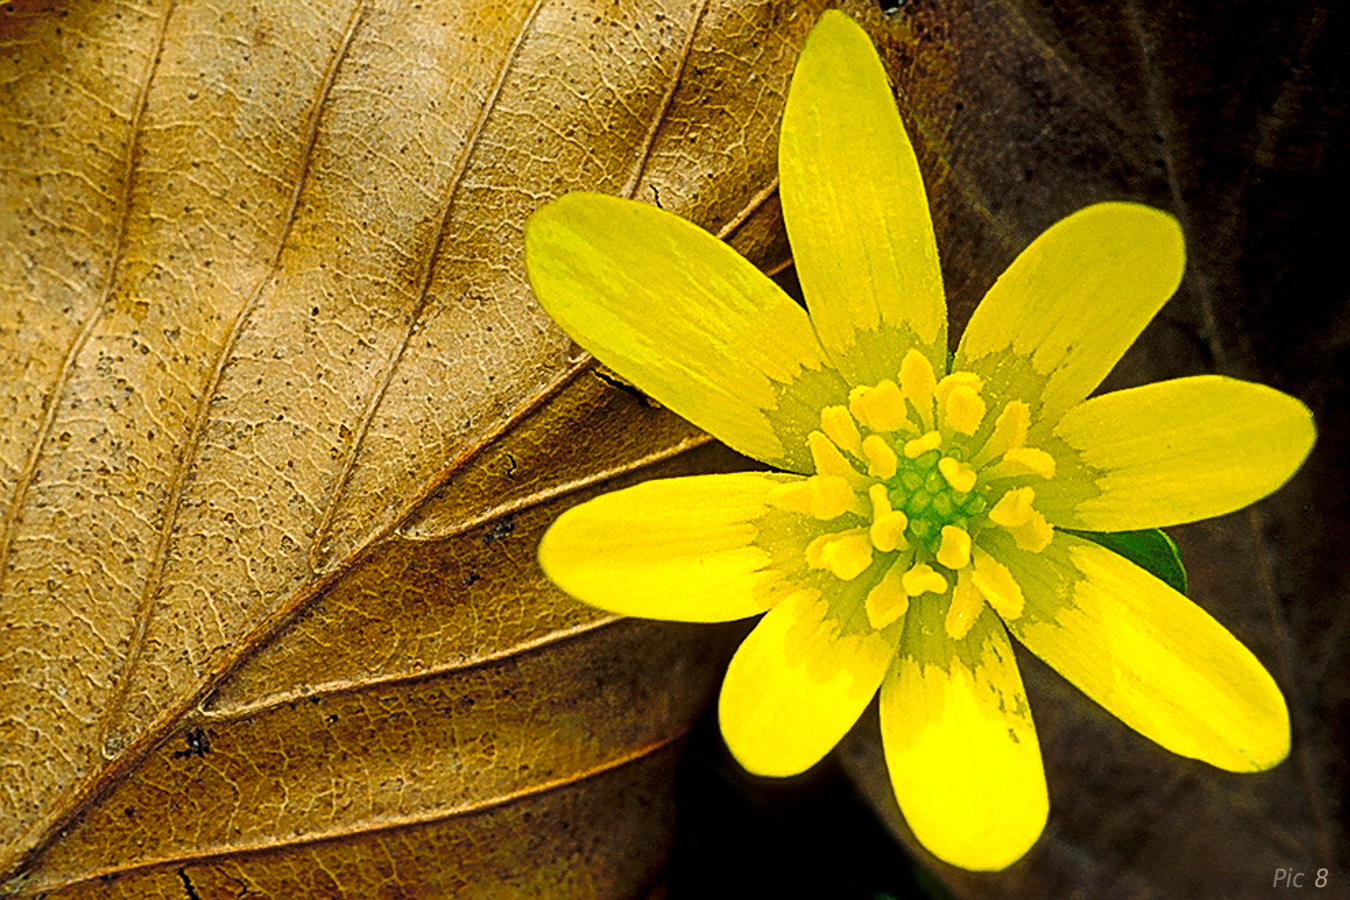 Celandine and leaf (Illustrating a point in the book)